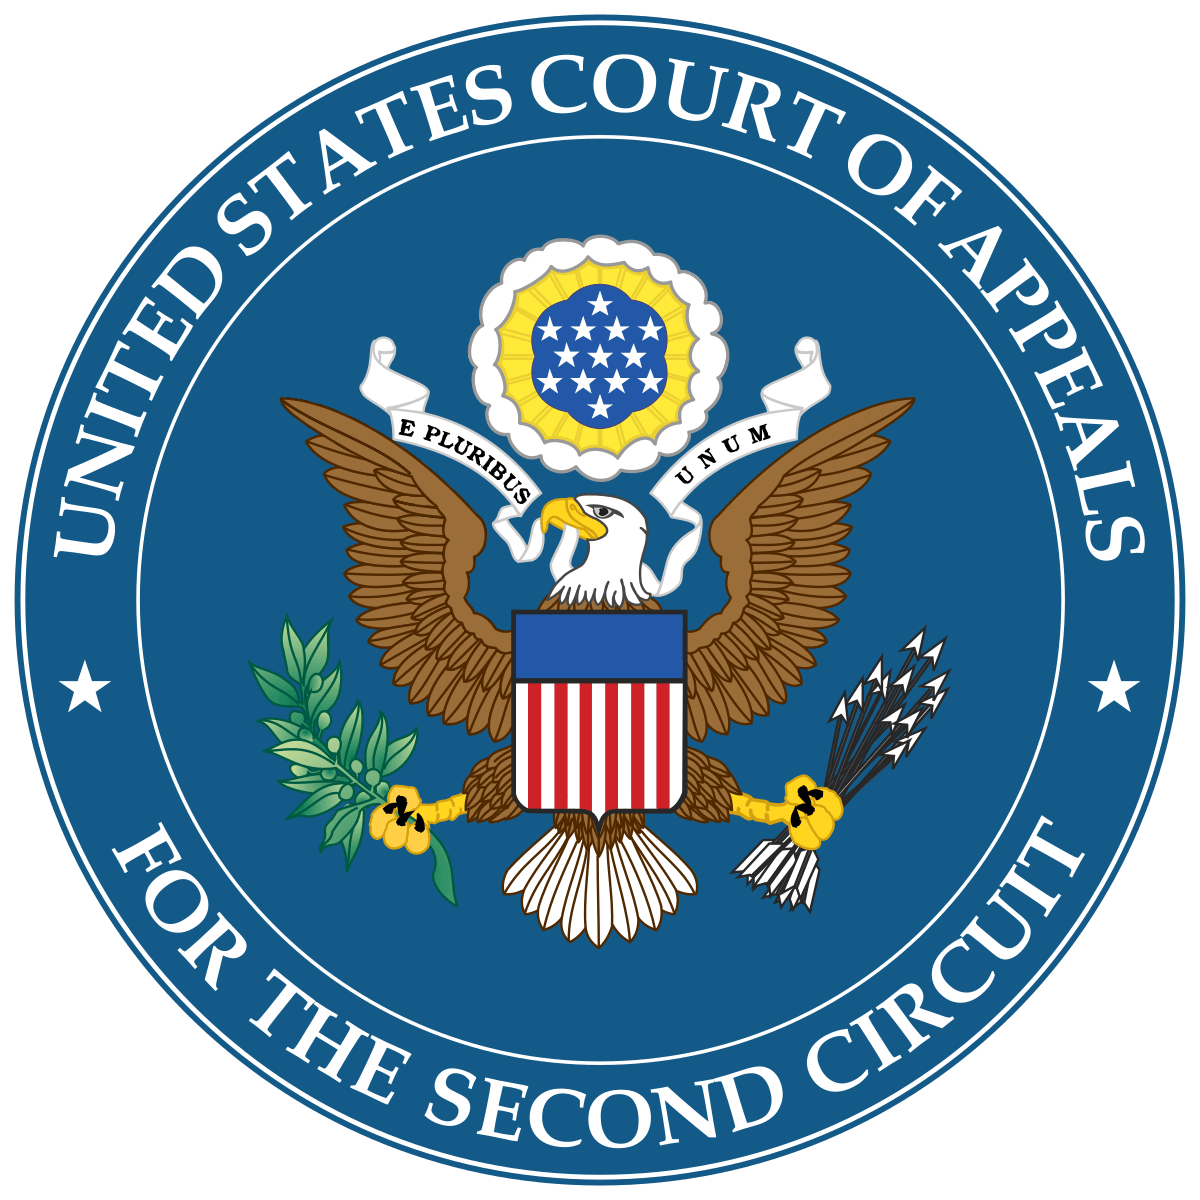 United States Supreme Court Logo - United States Court of Appeals for the Second Circuit